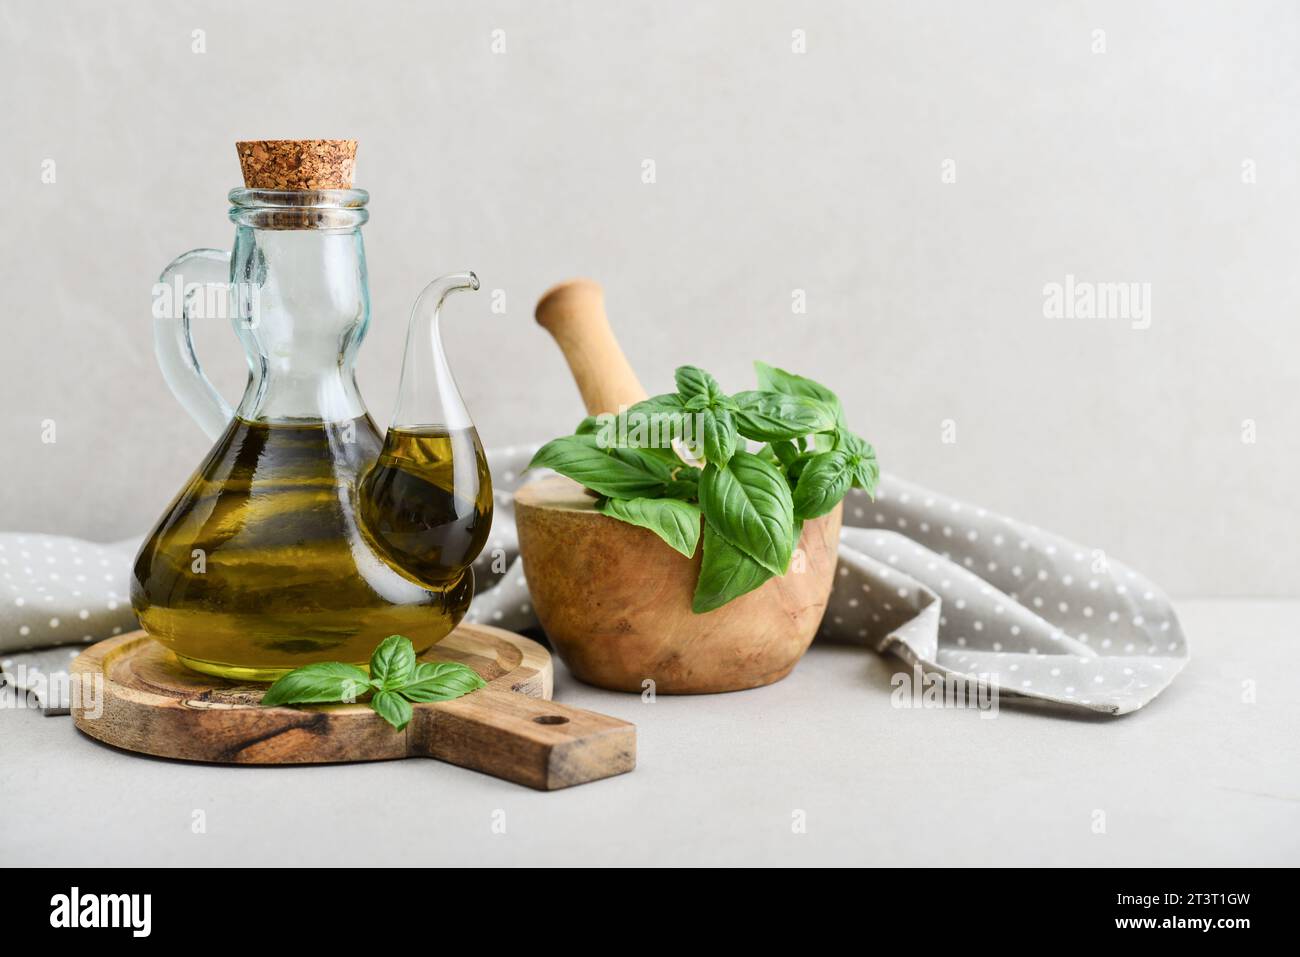 Olive oil in vintage bottle with basil and wooden cutting board  on light background Stock Photo